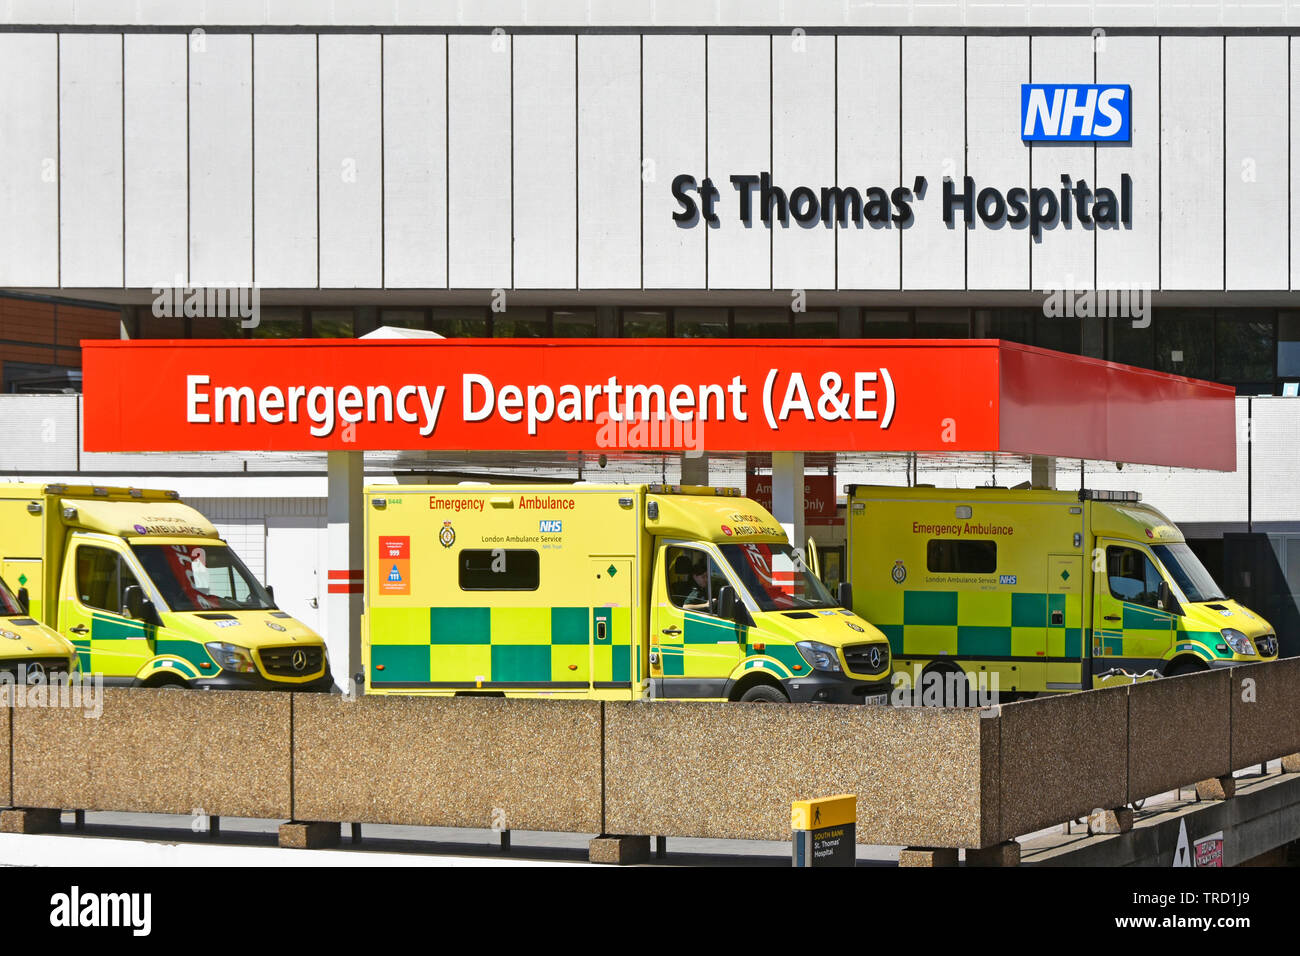 London ambulance service vehicles at St Thomas NHS hospital building A&E accident emergency healthcare department waiting at drop off area Lambeth UK Stock Photo